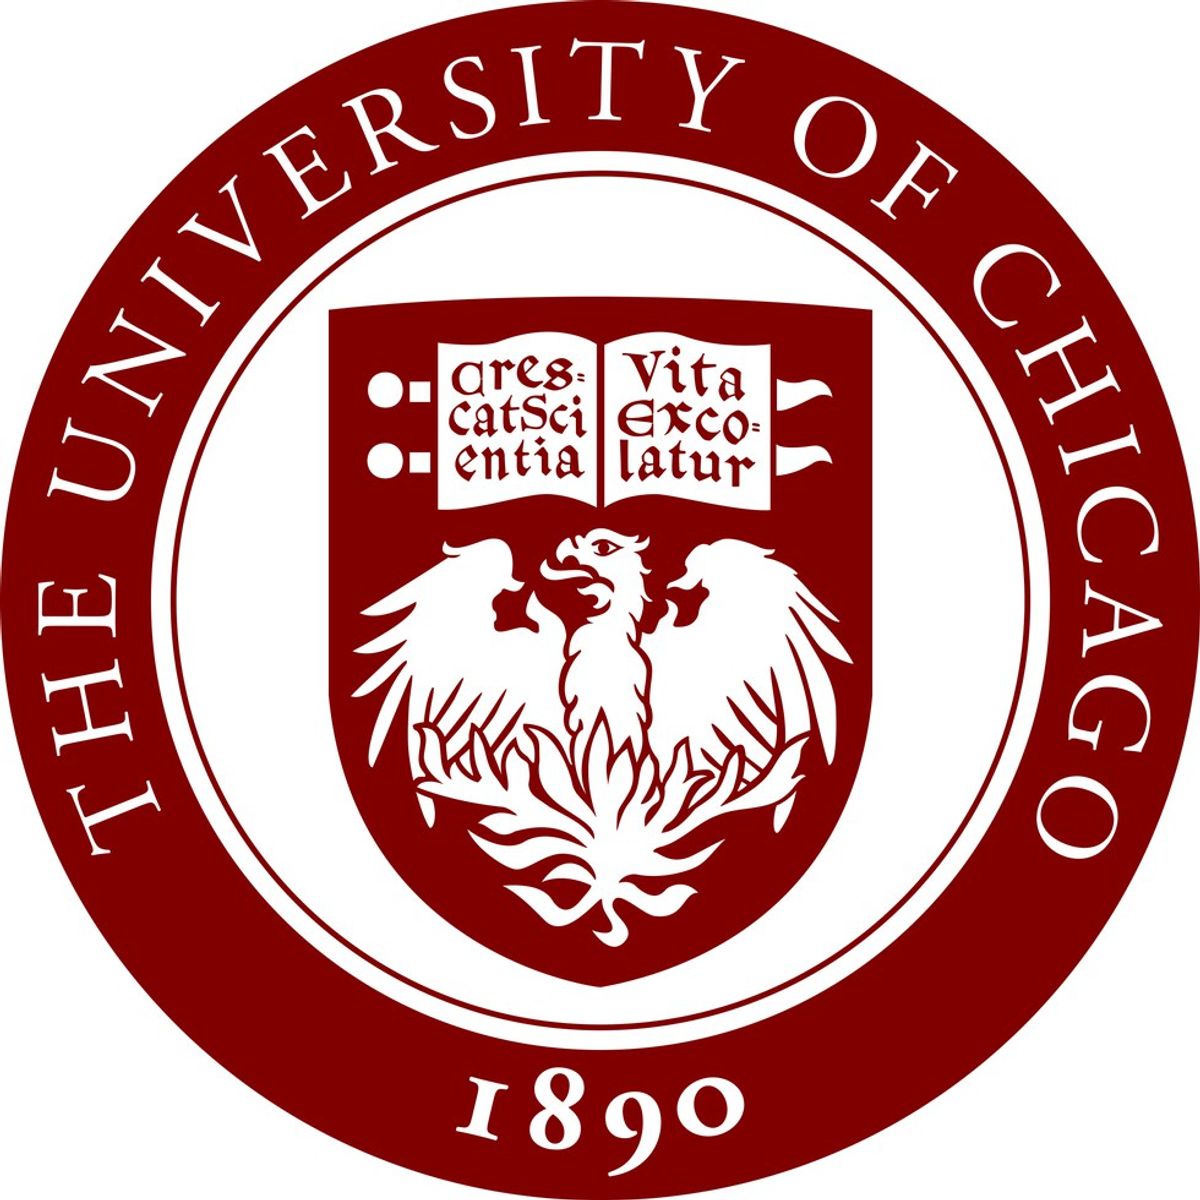 An Open Letter To UChicago's Trigger Warning Policy